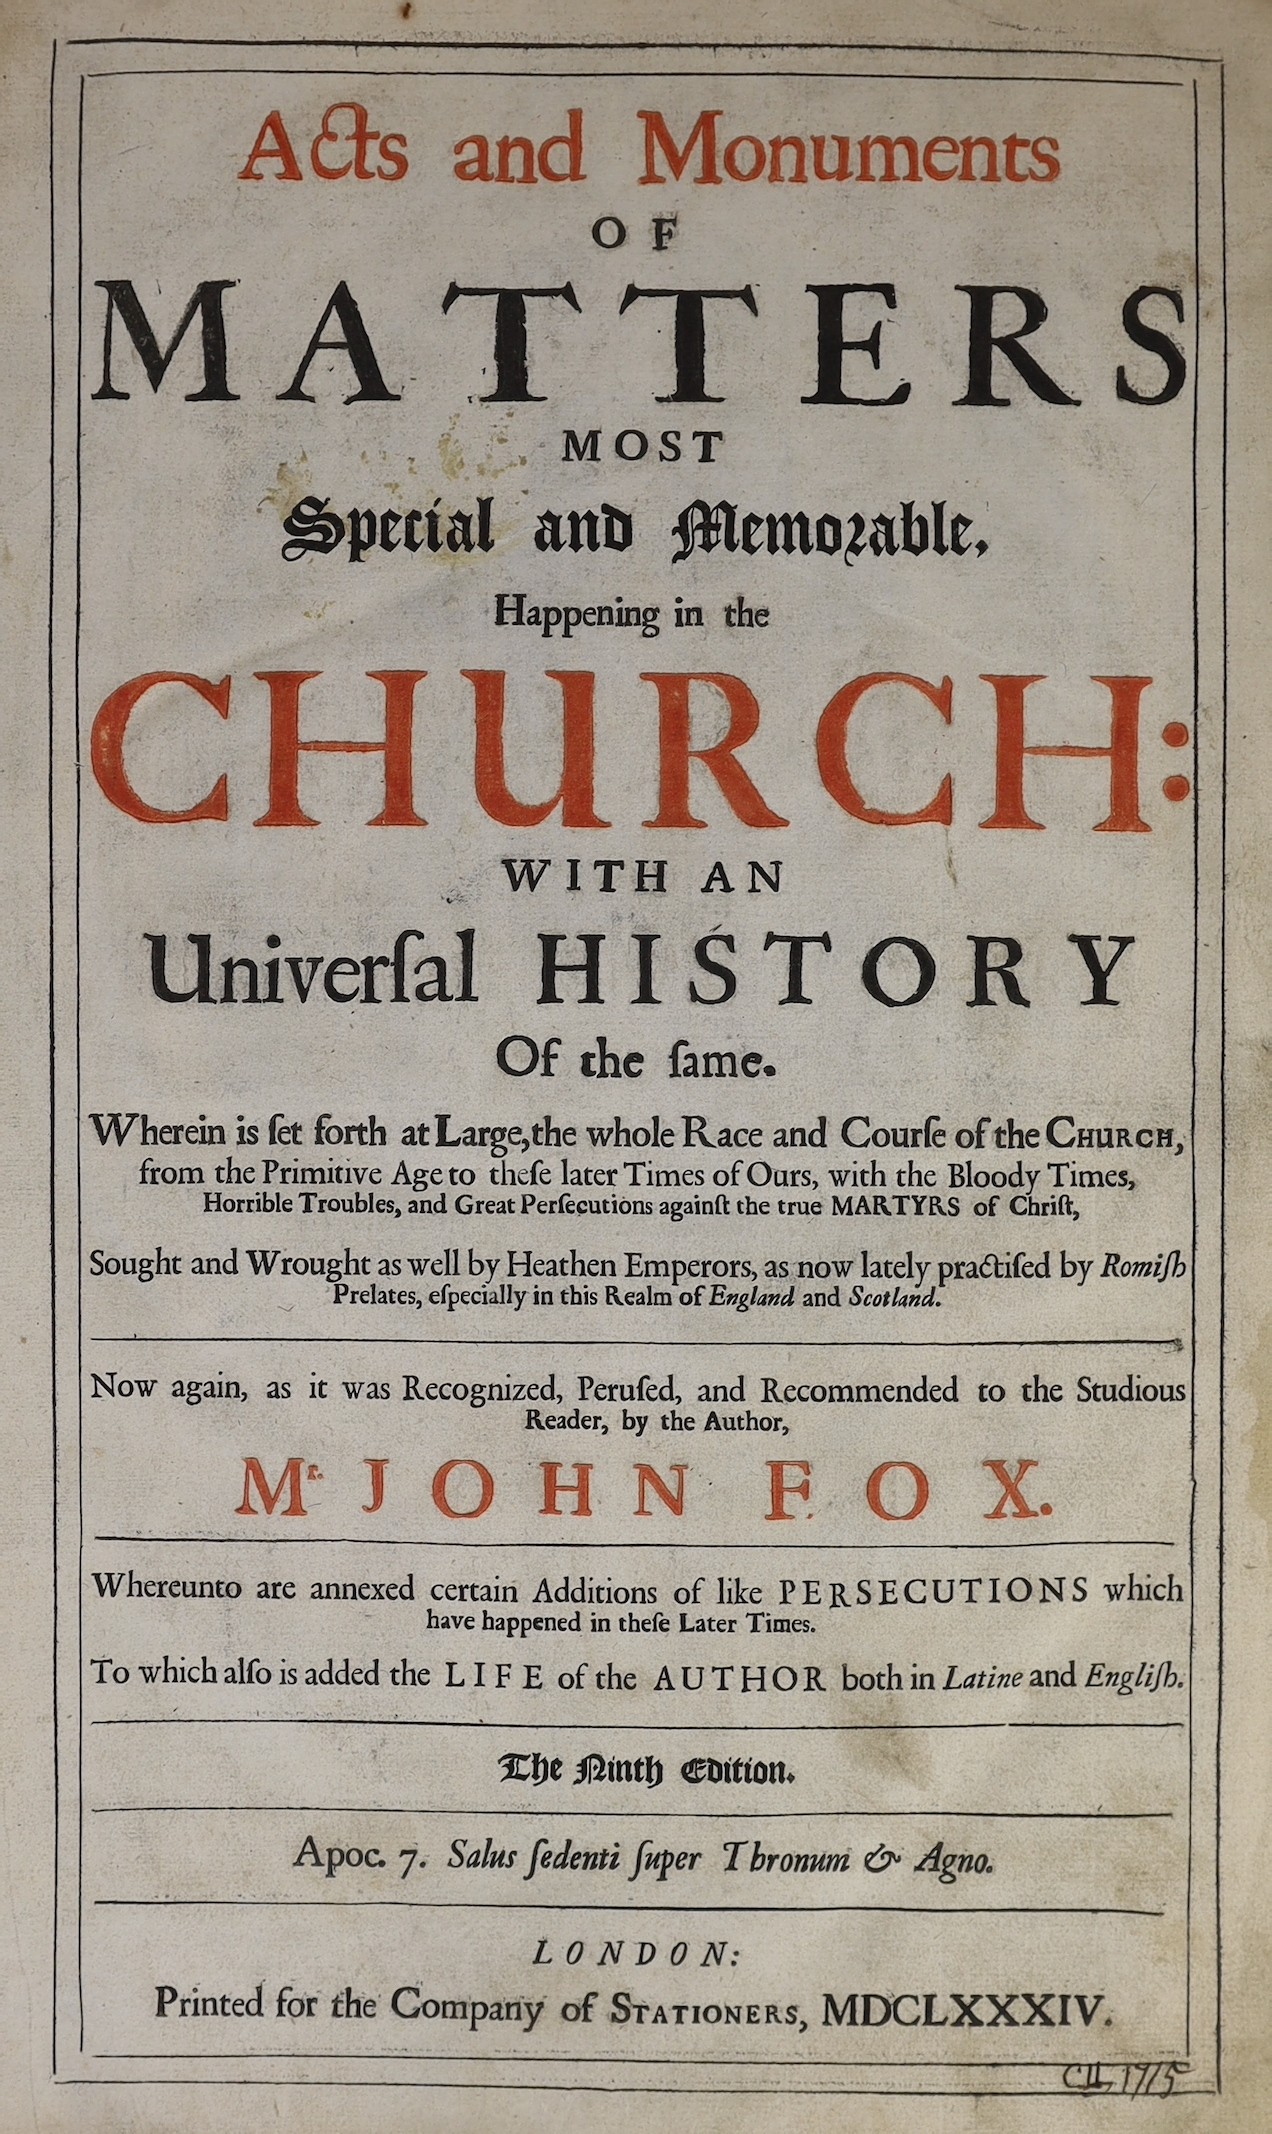 Fox, John - Acts and Monuments of Matters of Most Special and Memorable, Happening in the Church.... Whereunto are annexed certain additions..... to which also is added the Life of the Author.... the ninth edition, vols